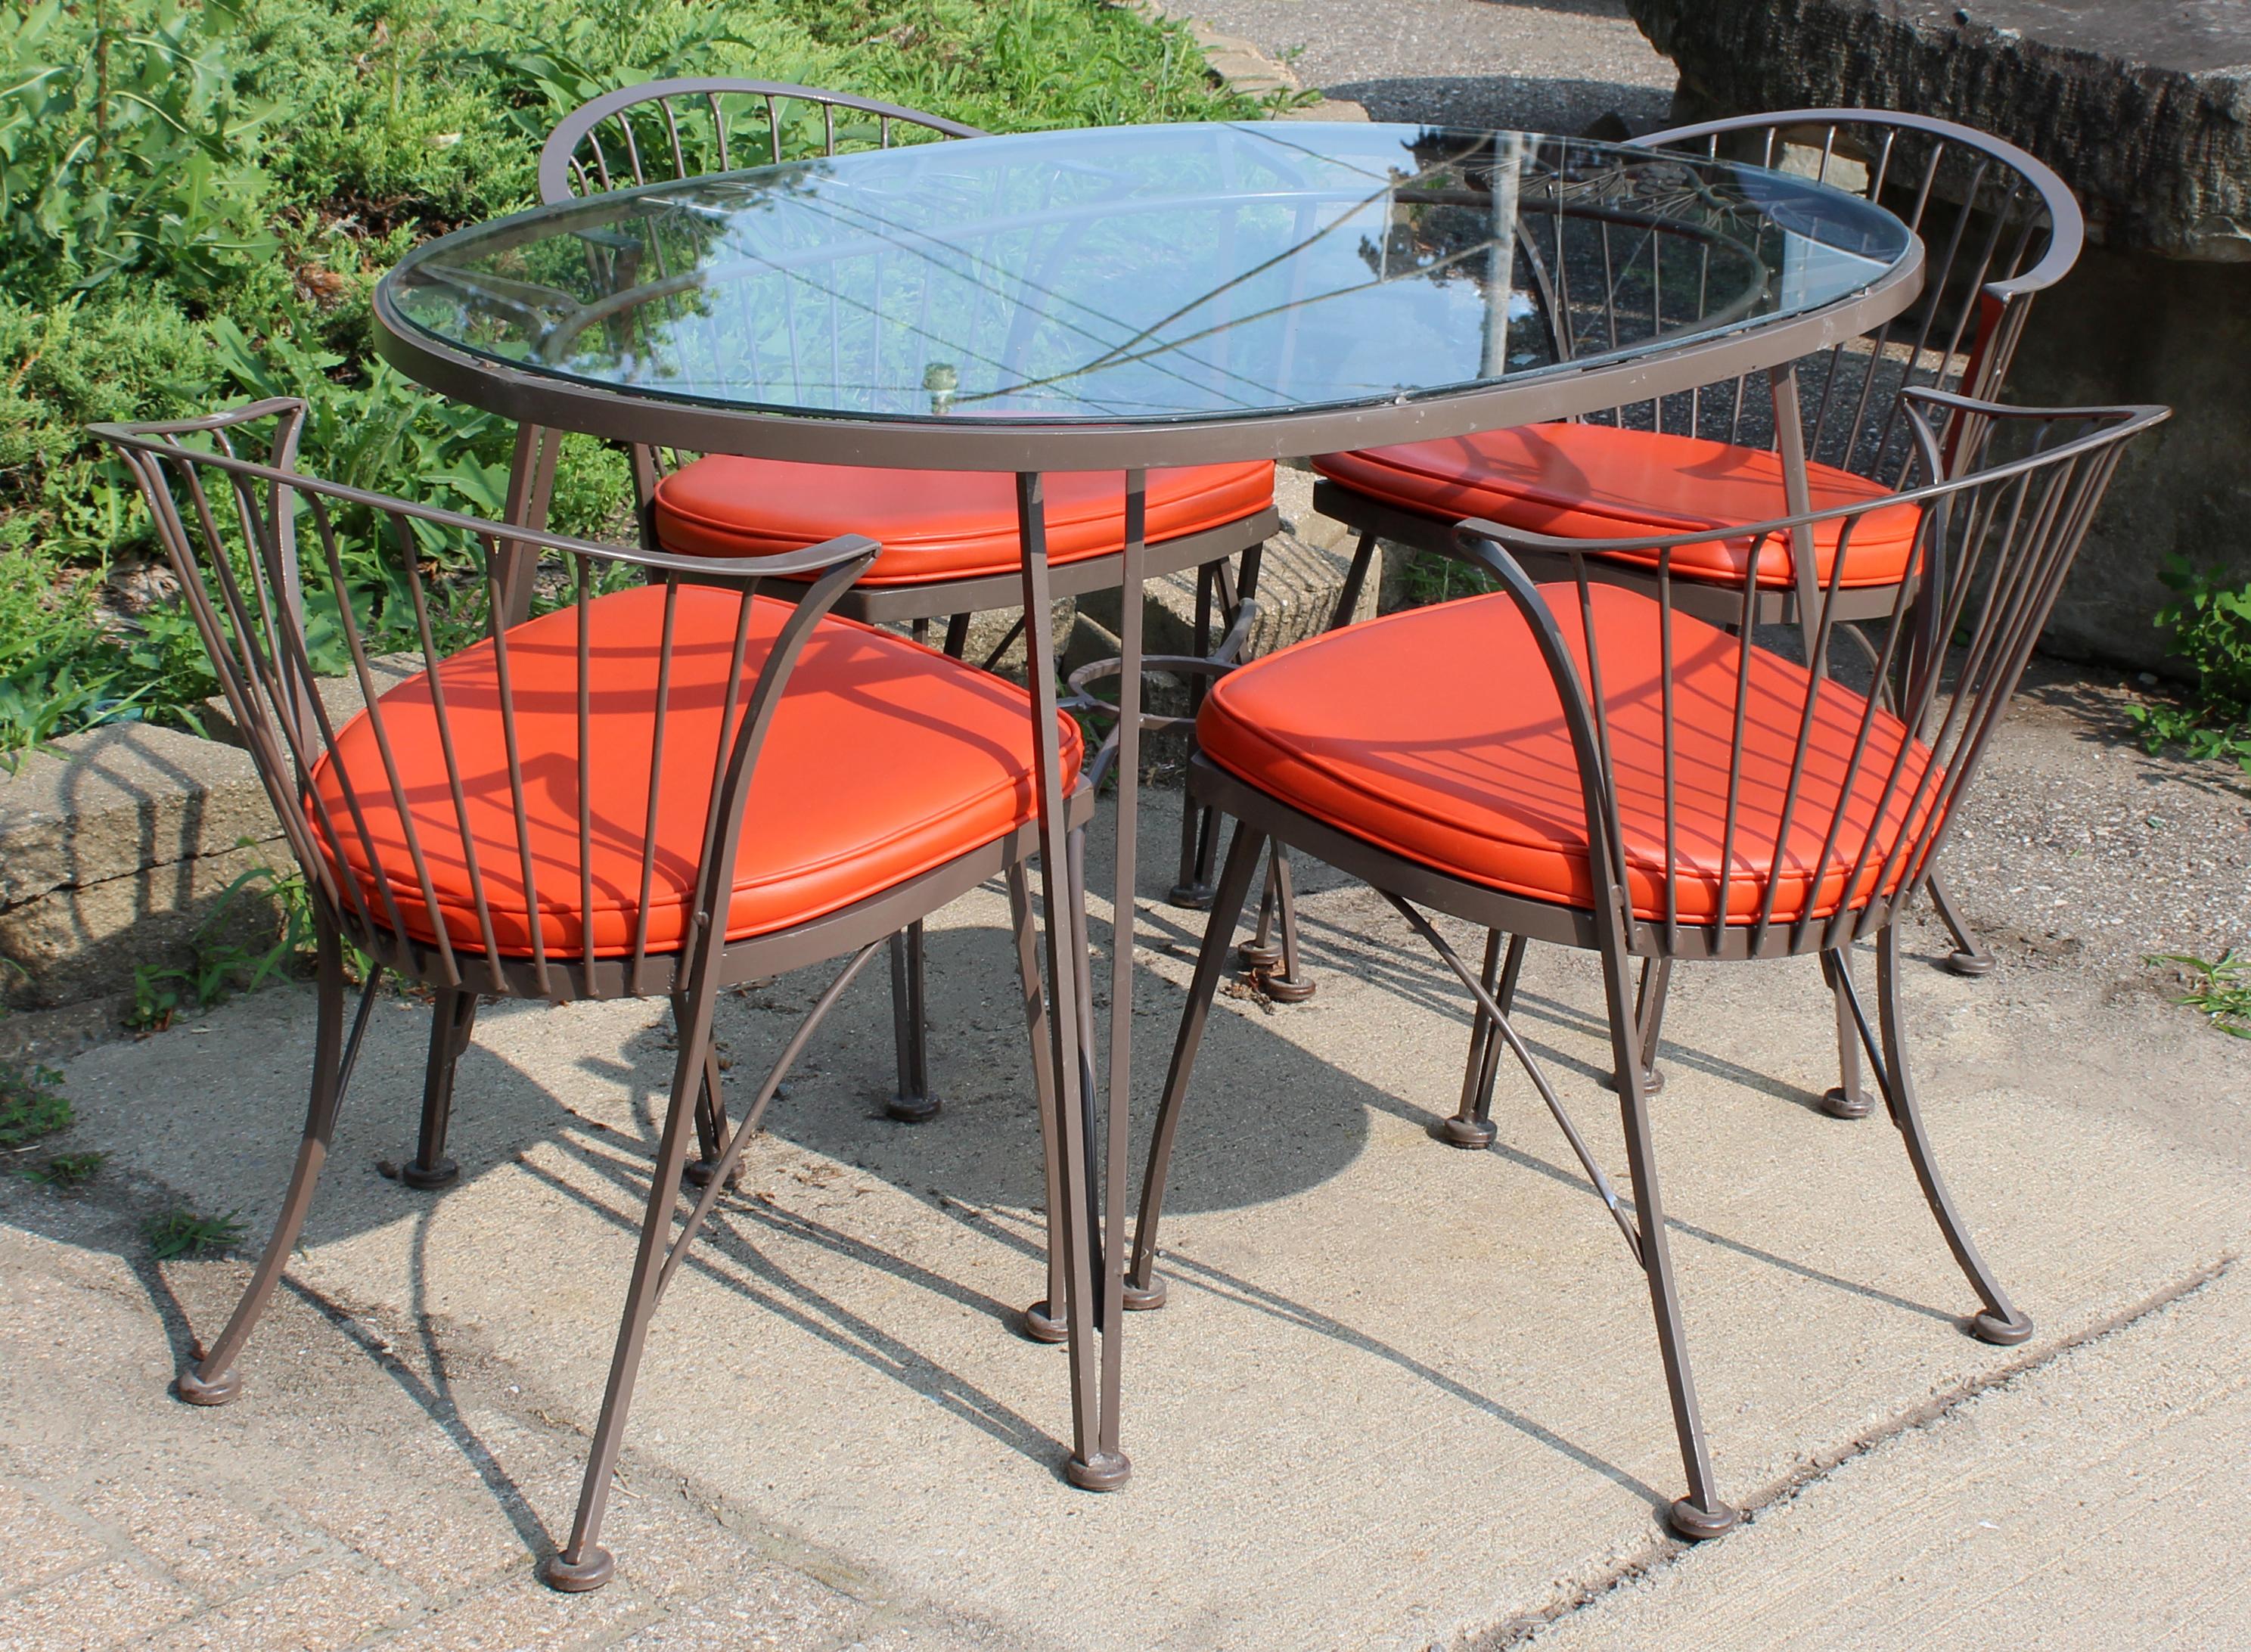 For your consideration is a rare full Klismos patio set, including four chairs with orange seat cushions and a pinecrest table with a glass top, by Russell Woodard, circa the 1960s. In very good vintage condition. The dimensions of the table are 52